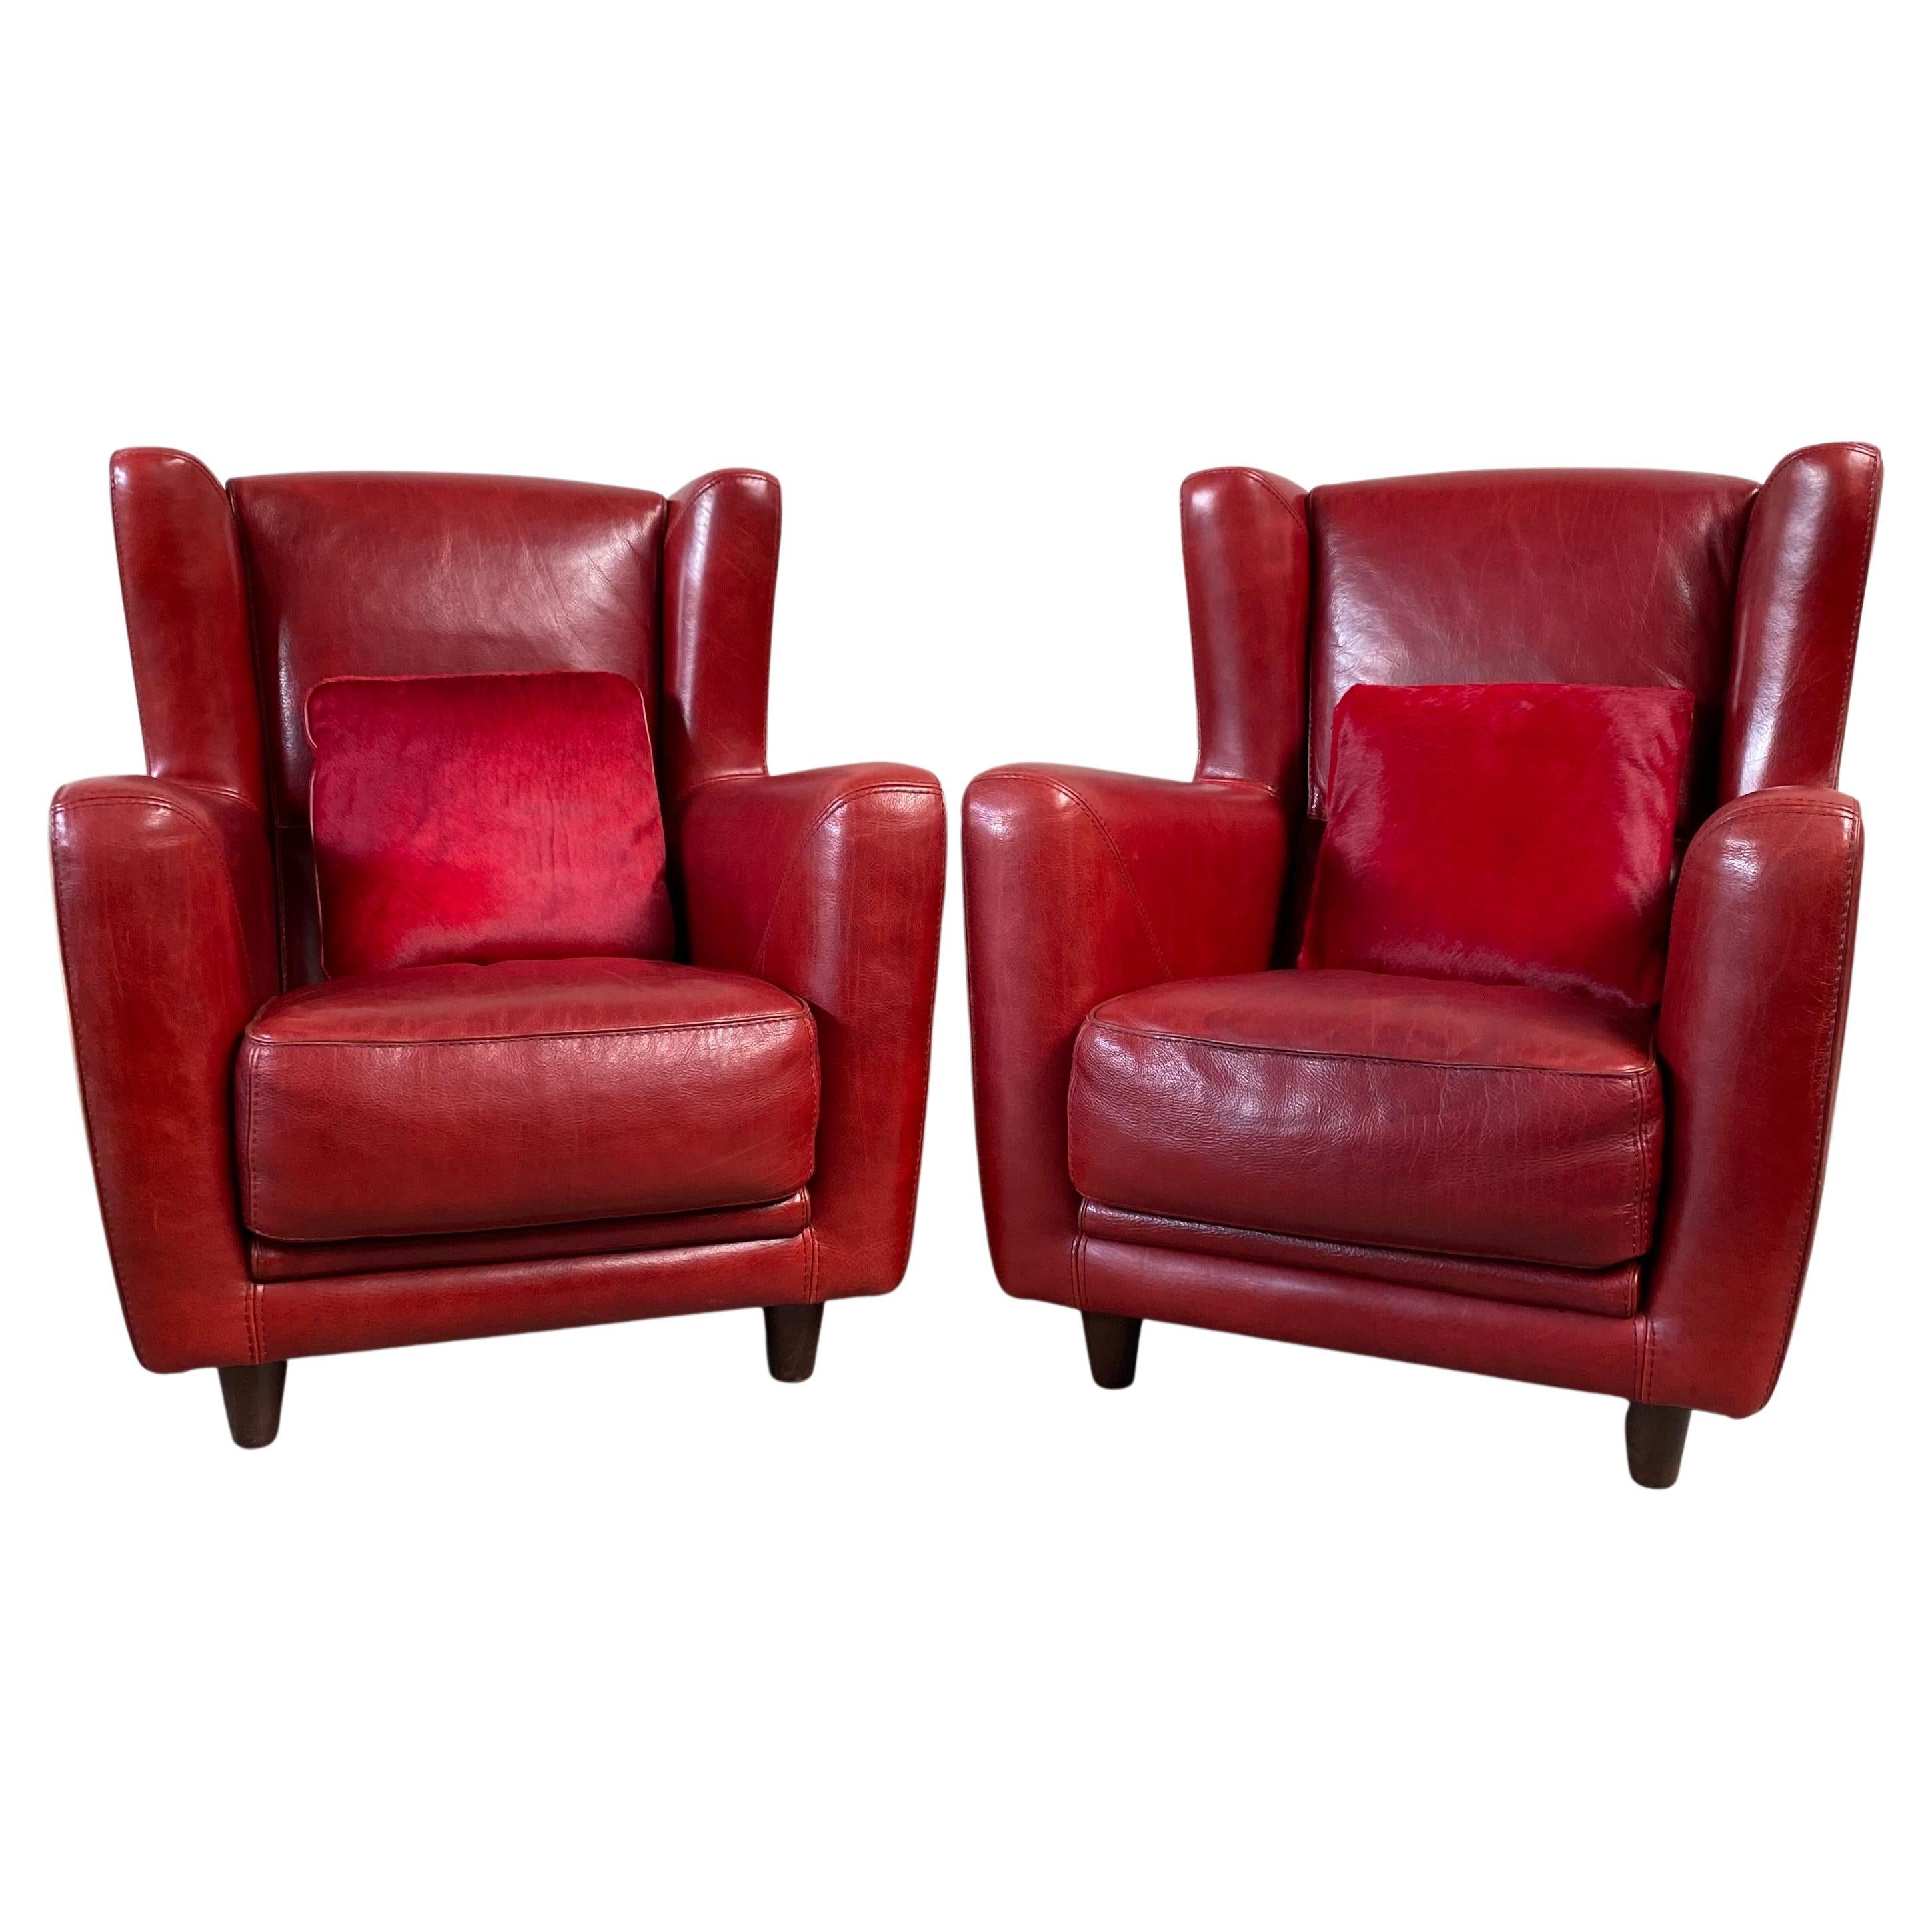 Pair of Ox-Blood Red Leather Lounge Chairs Begére by Baxter Italy 90s